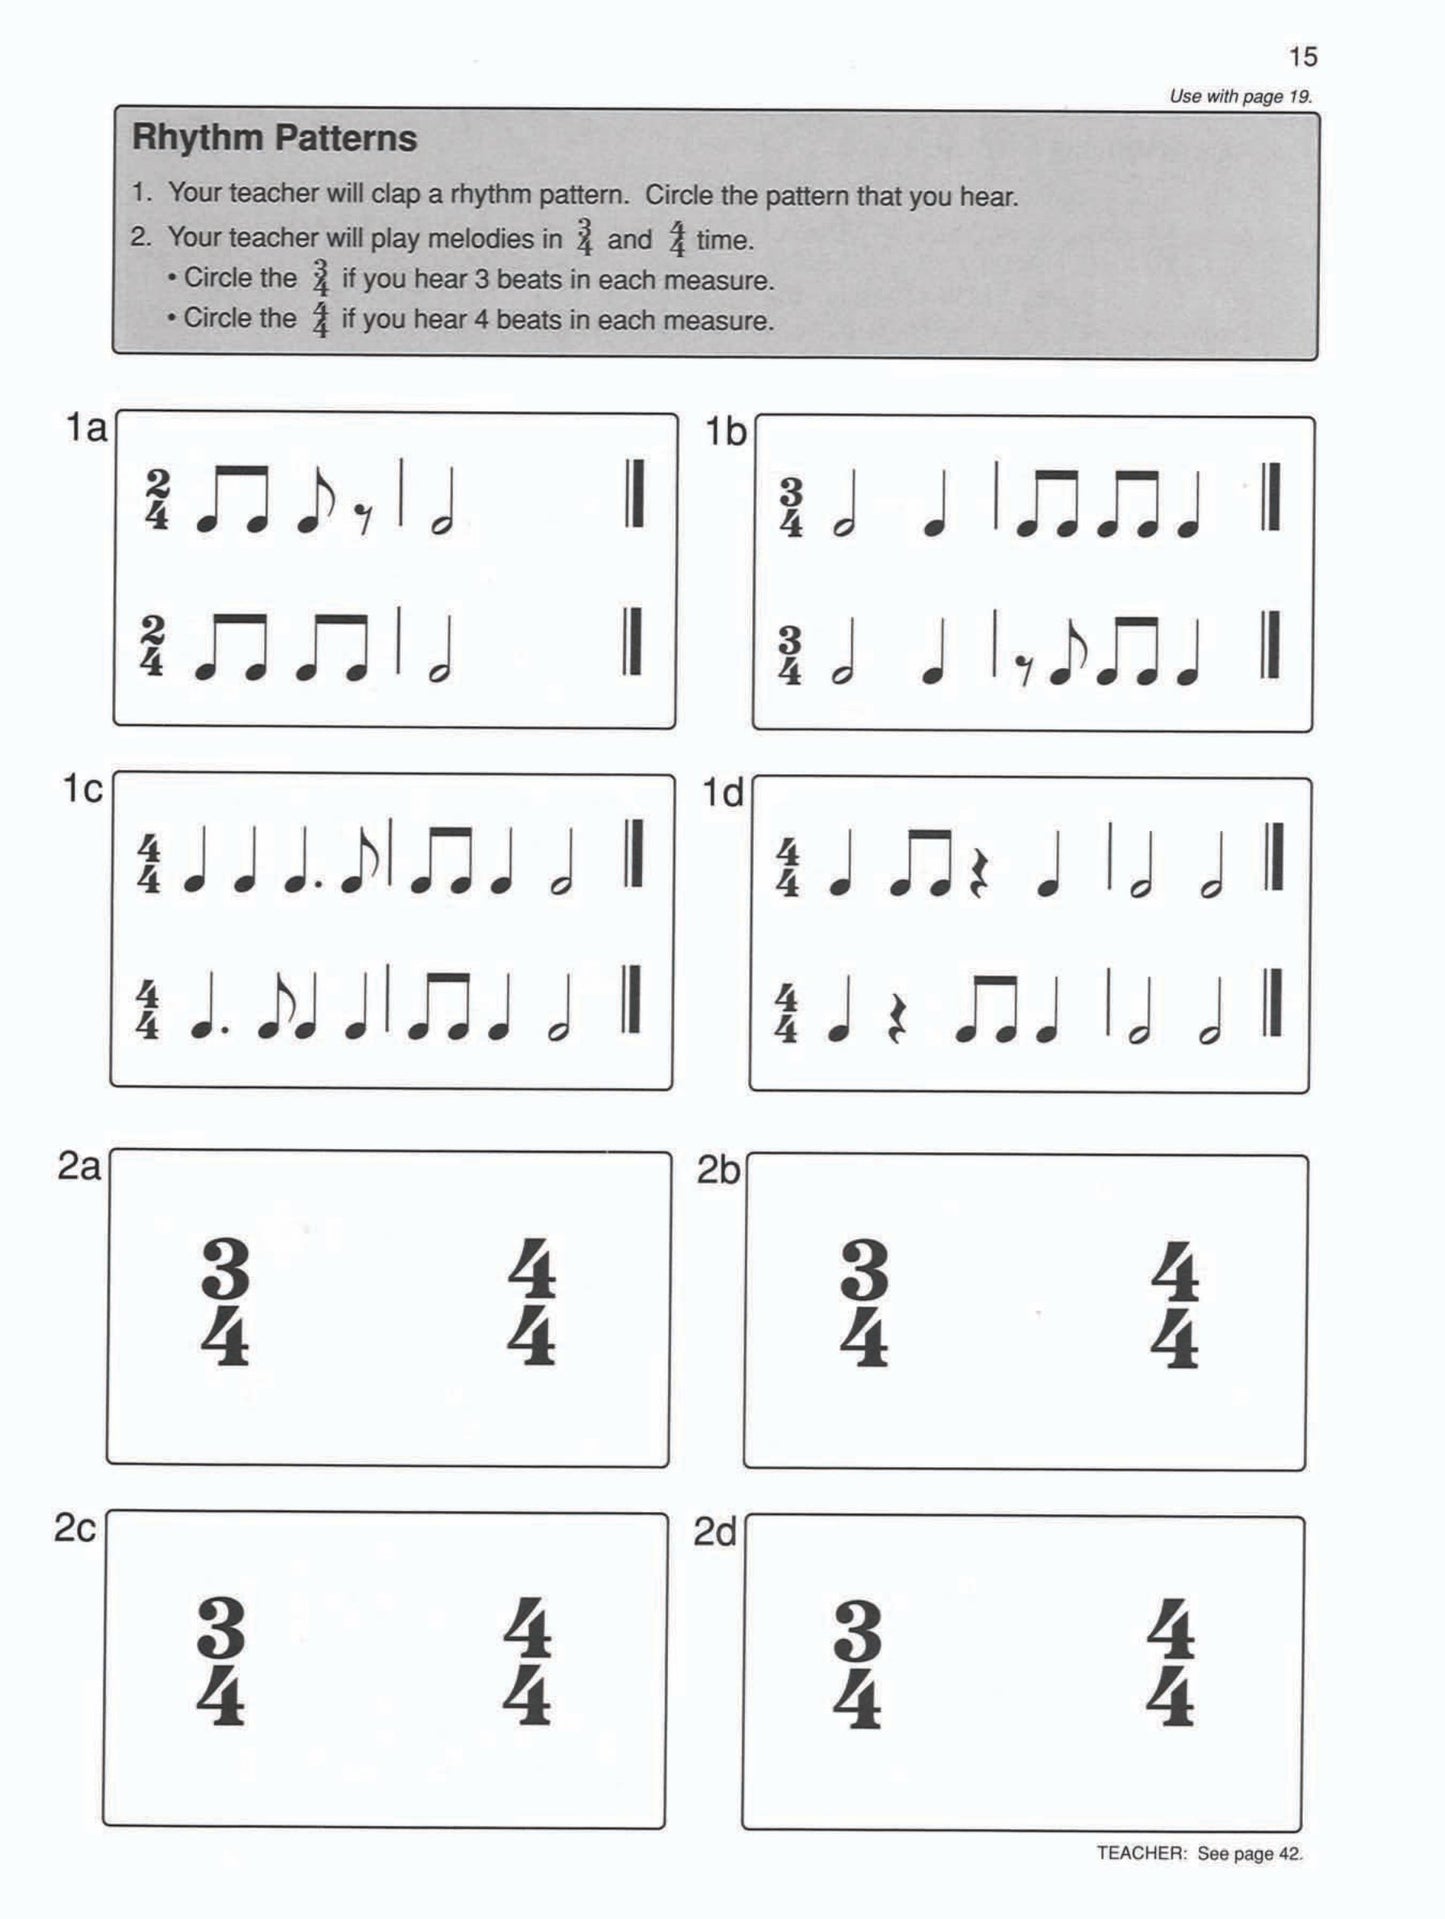 Alfred's Basic Piano Library - Ear Training Book Level 2